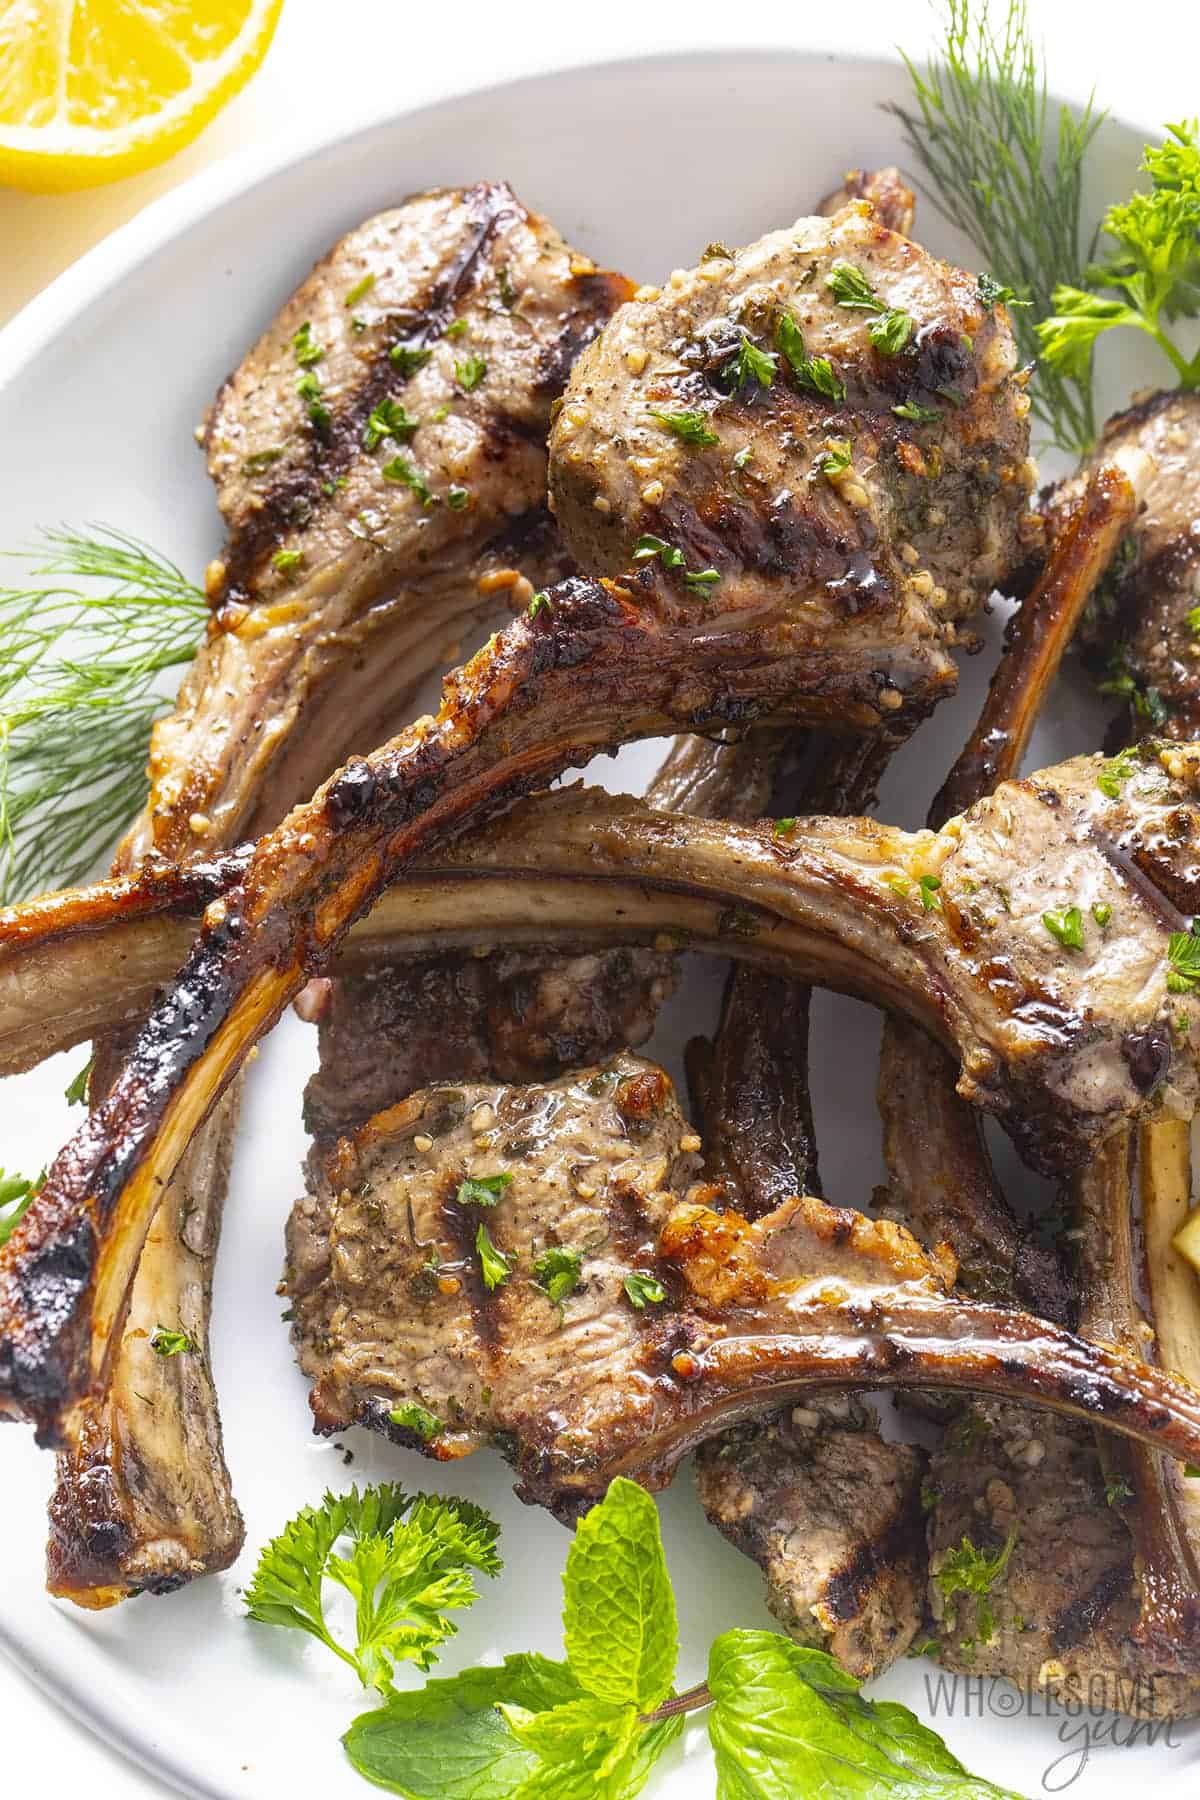 Learn how to grill lamb chops perfectly like these.